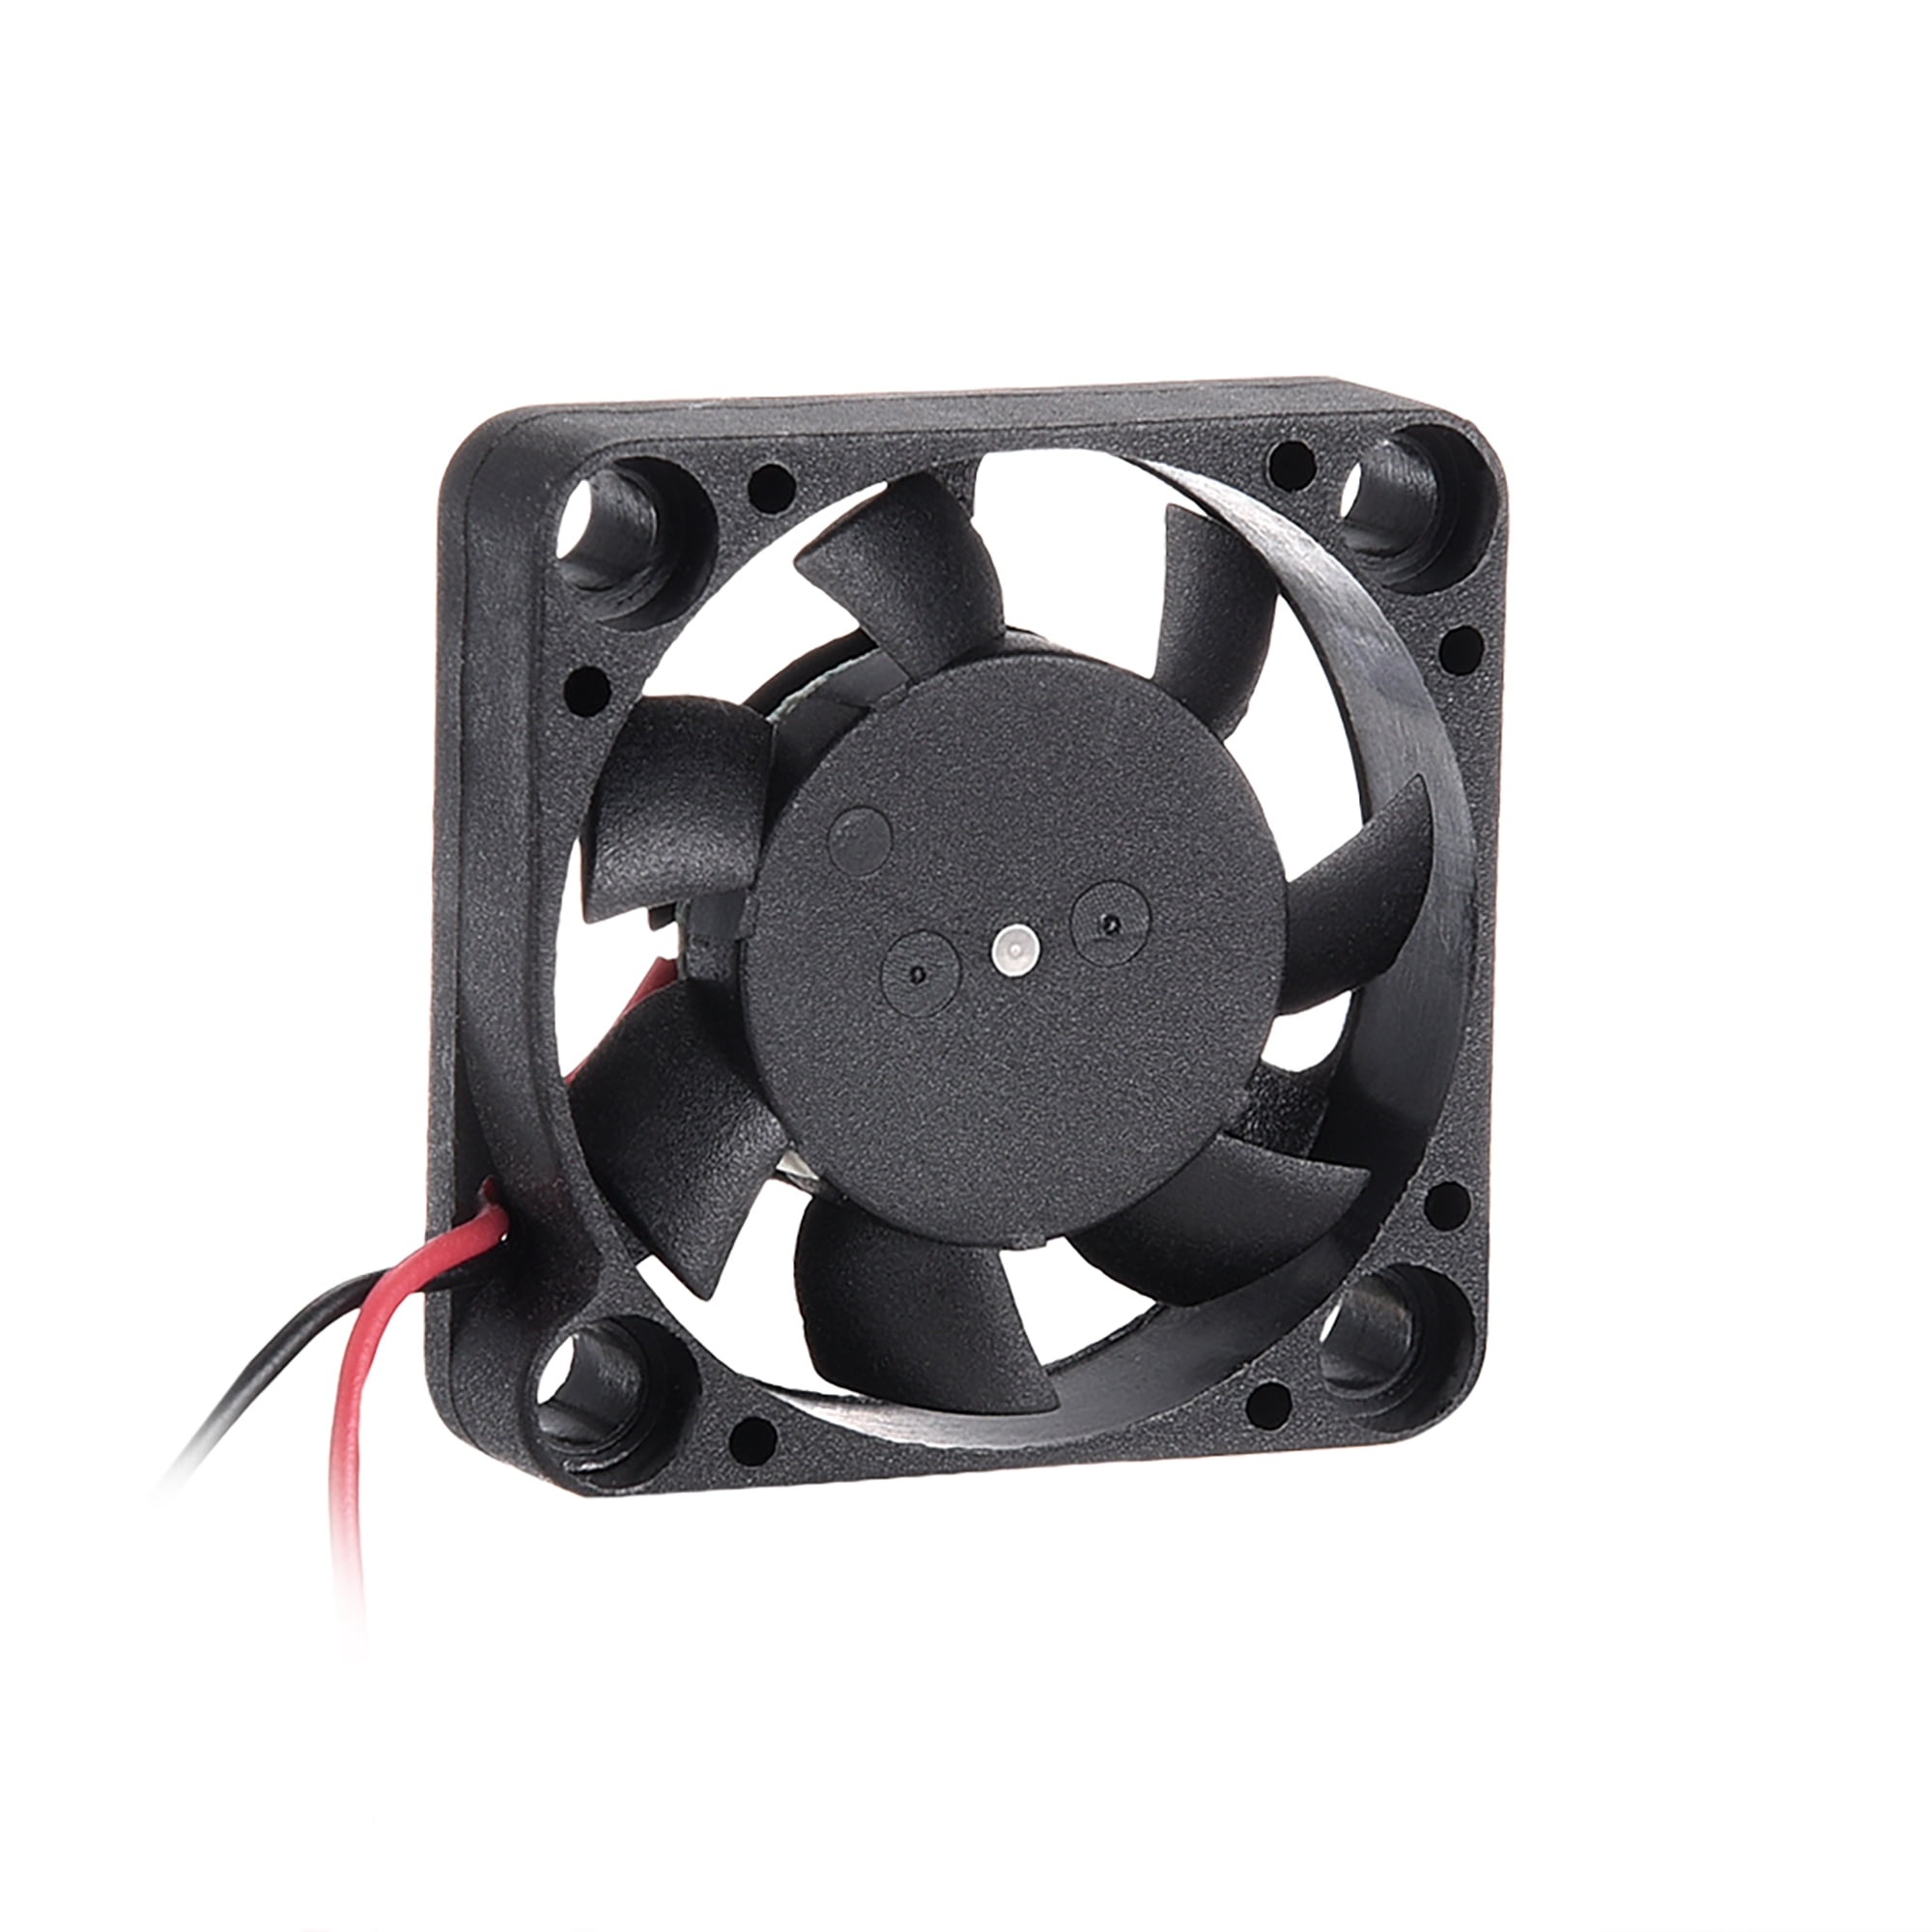 NEW Norcold replacement fan 12V .32A   4.75"X4.75"X1" Ball Bearing 1 fan 